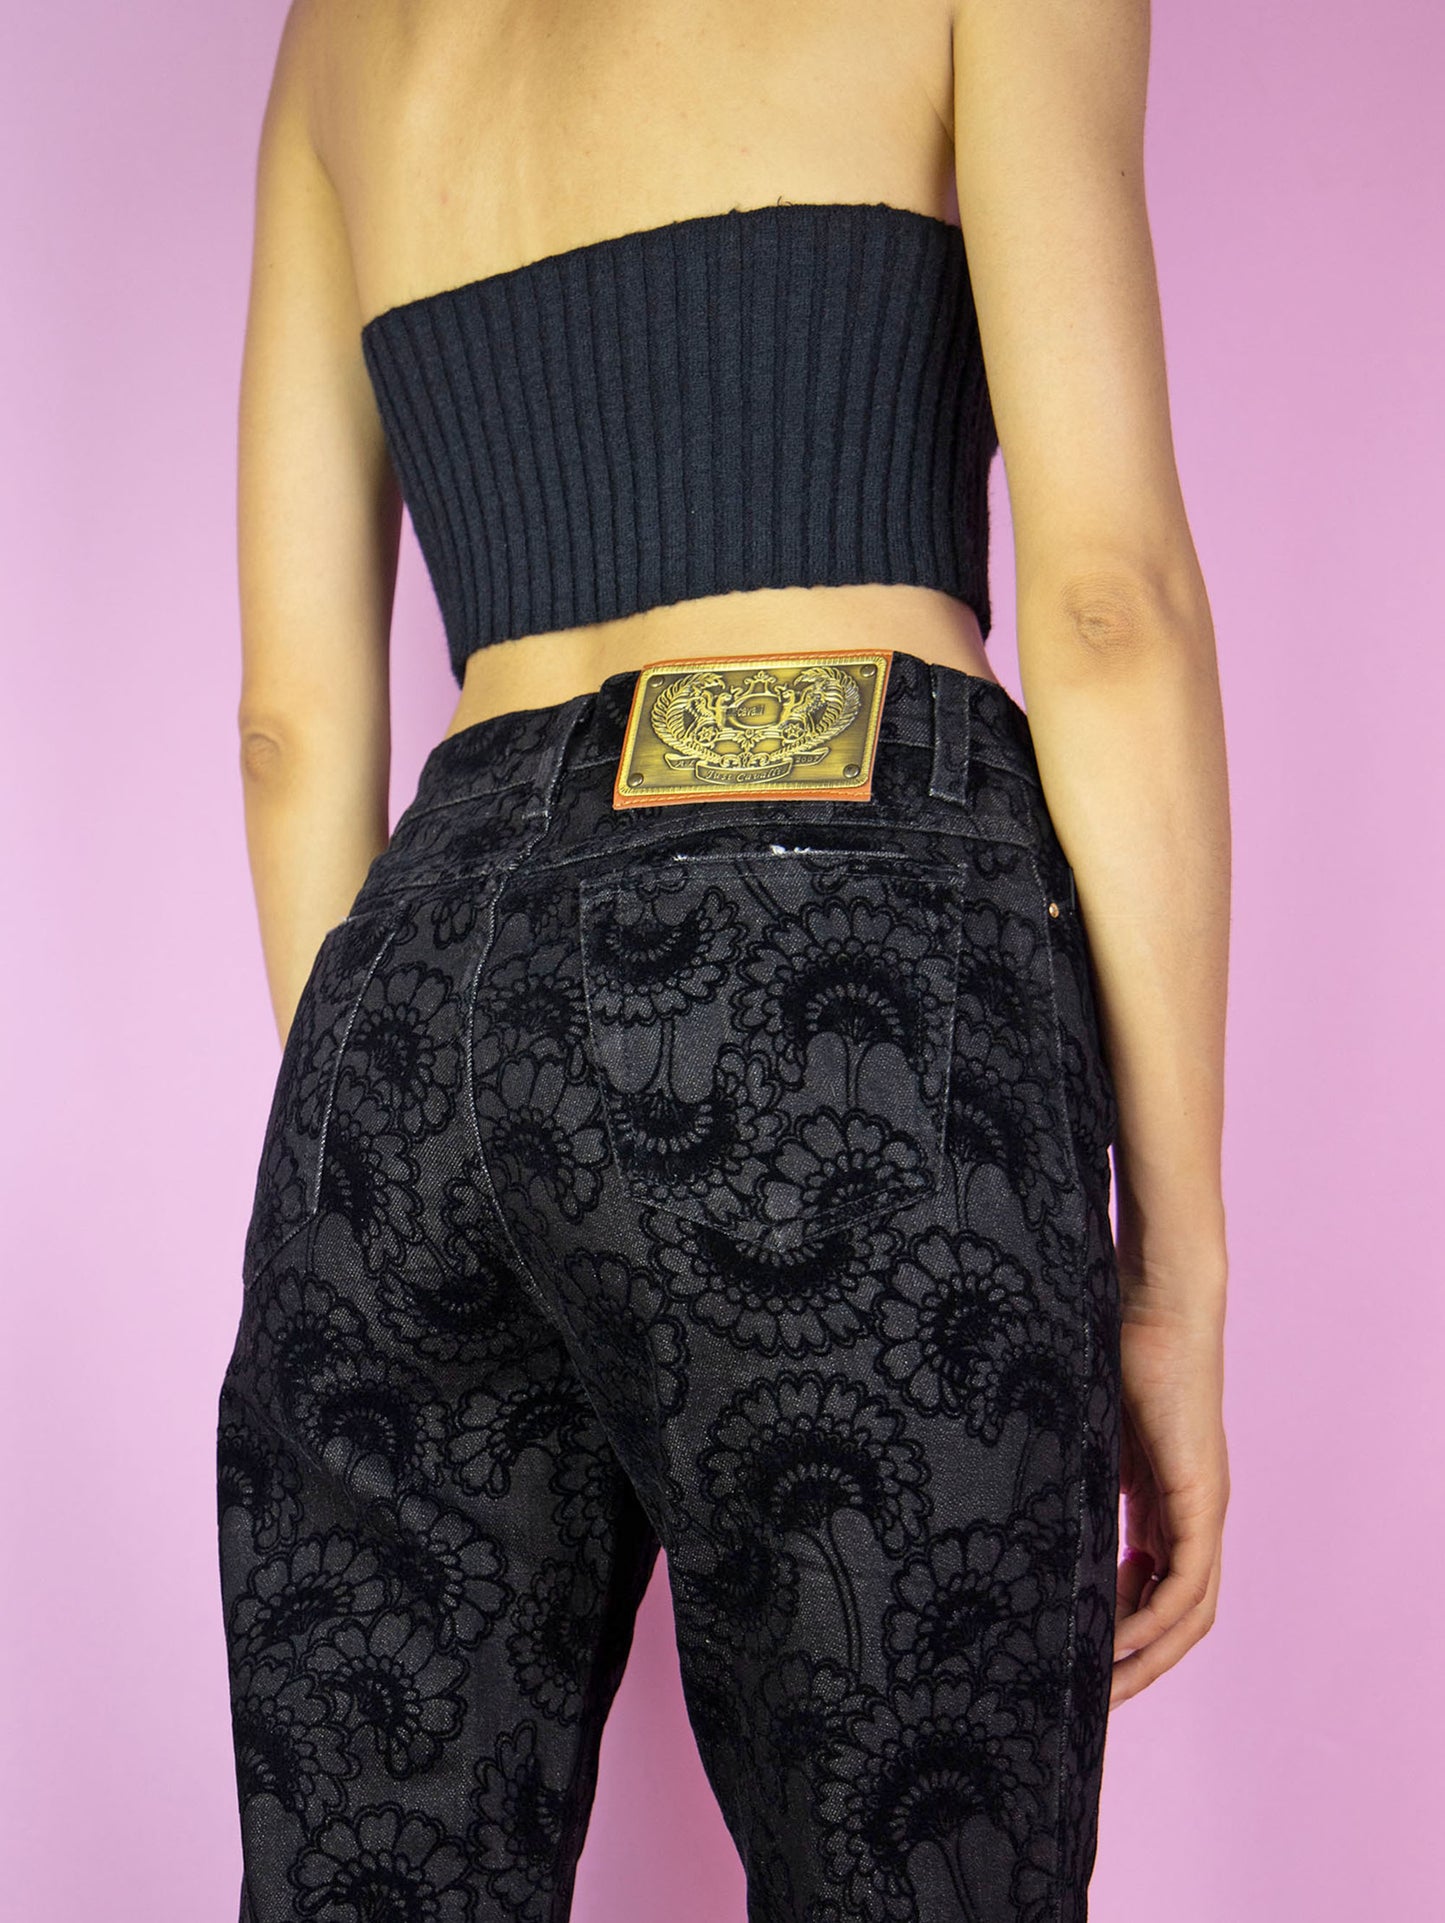 The Y2K Cavalli Black Straight Jeans are vintage 2000s mid-rise straight-leg pants, slightly stretchy adorned with floral velvet details by italian designer Roberto Cavalli. Excellent vintage condition.